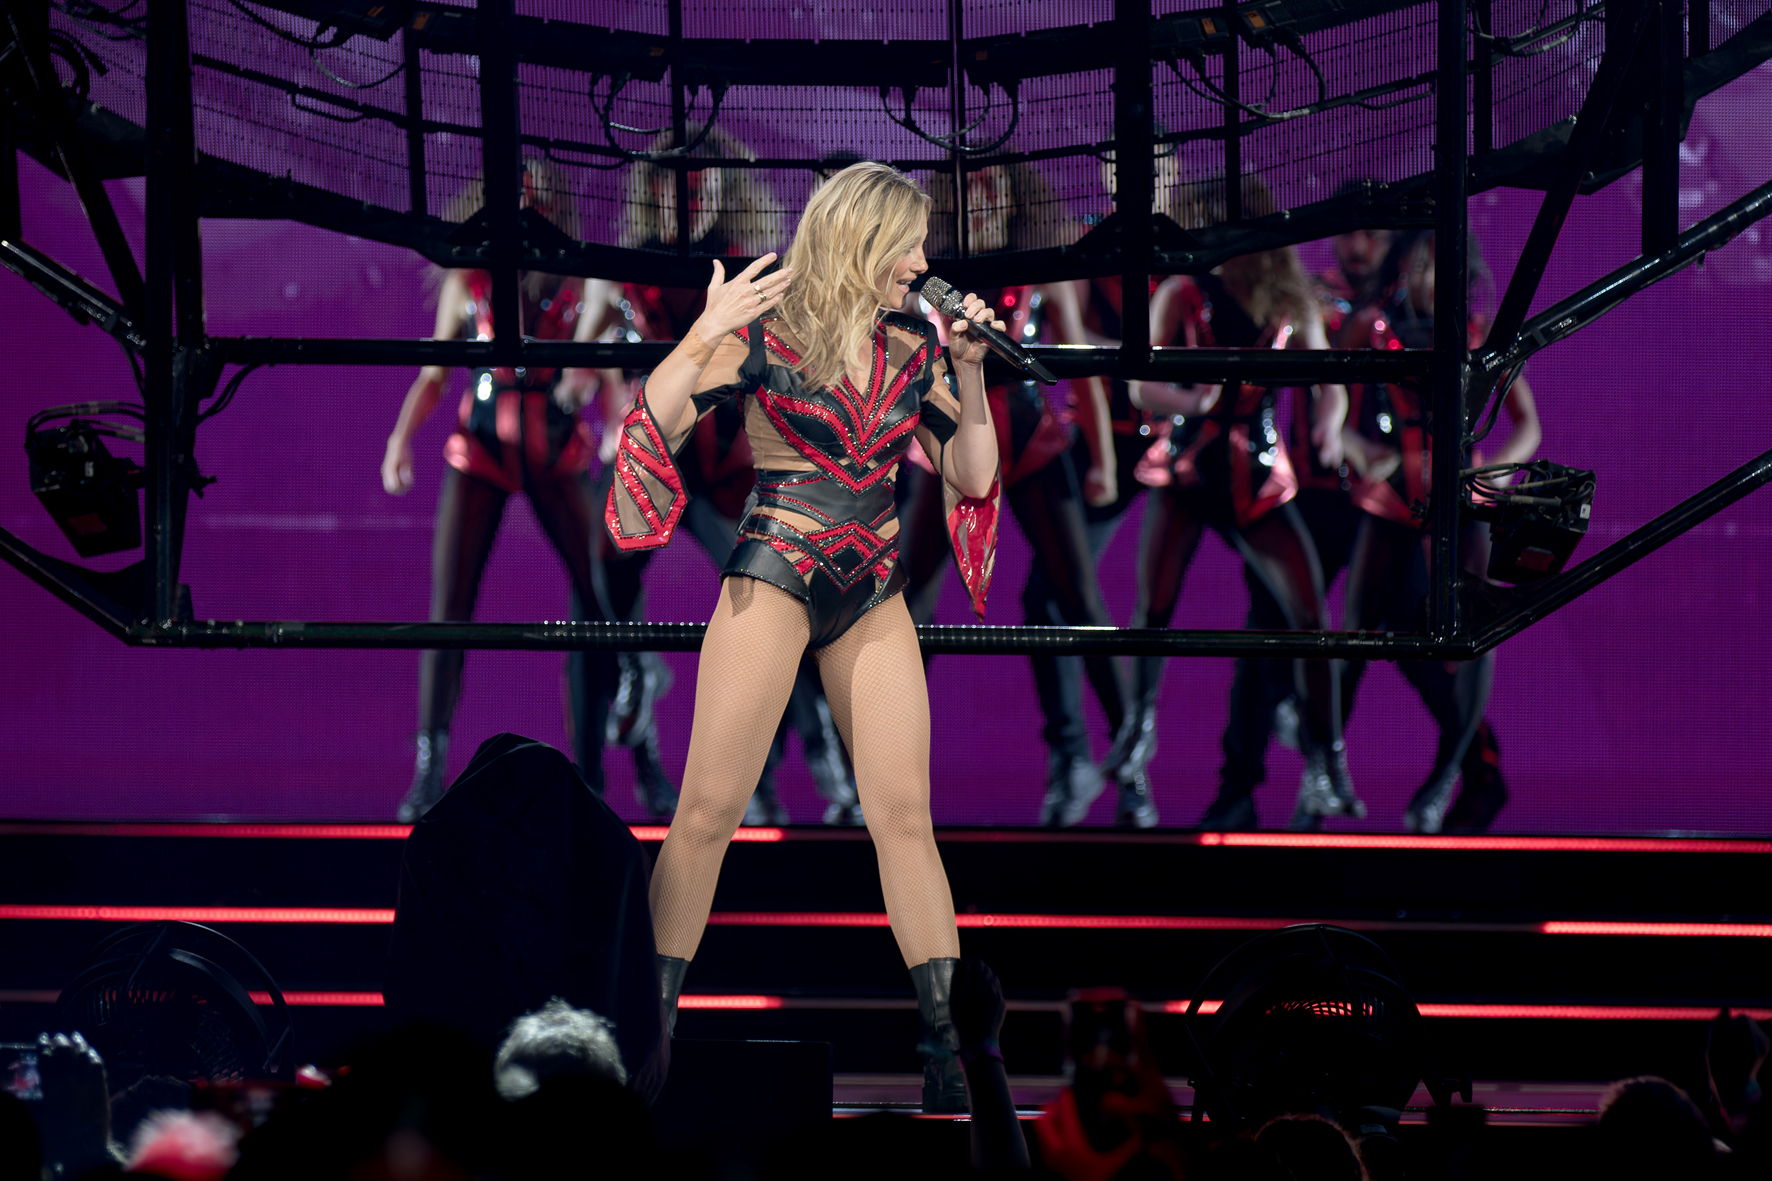 For her shows, Helene Fischer used custom-made gold- and platinum-coloured SKM 6000 handheld transmitters with MMK 965-1 microphone capsules